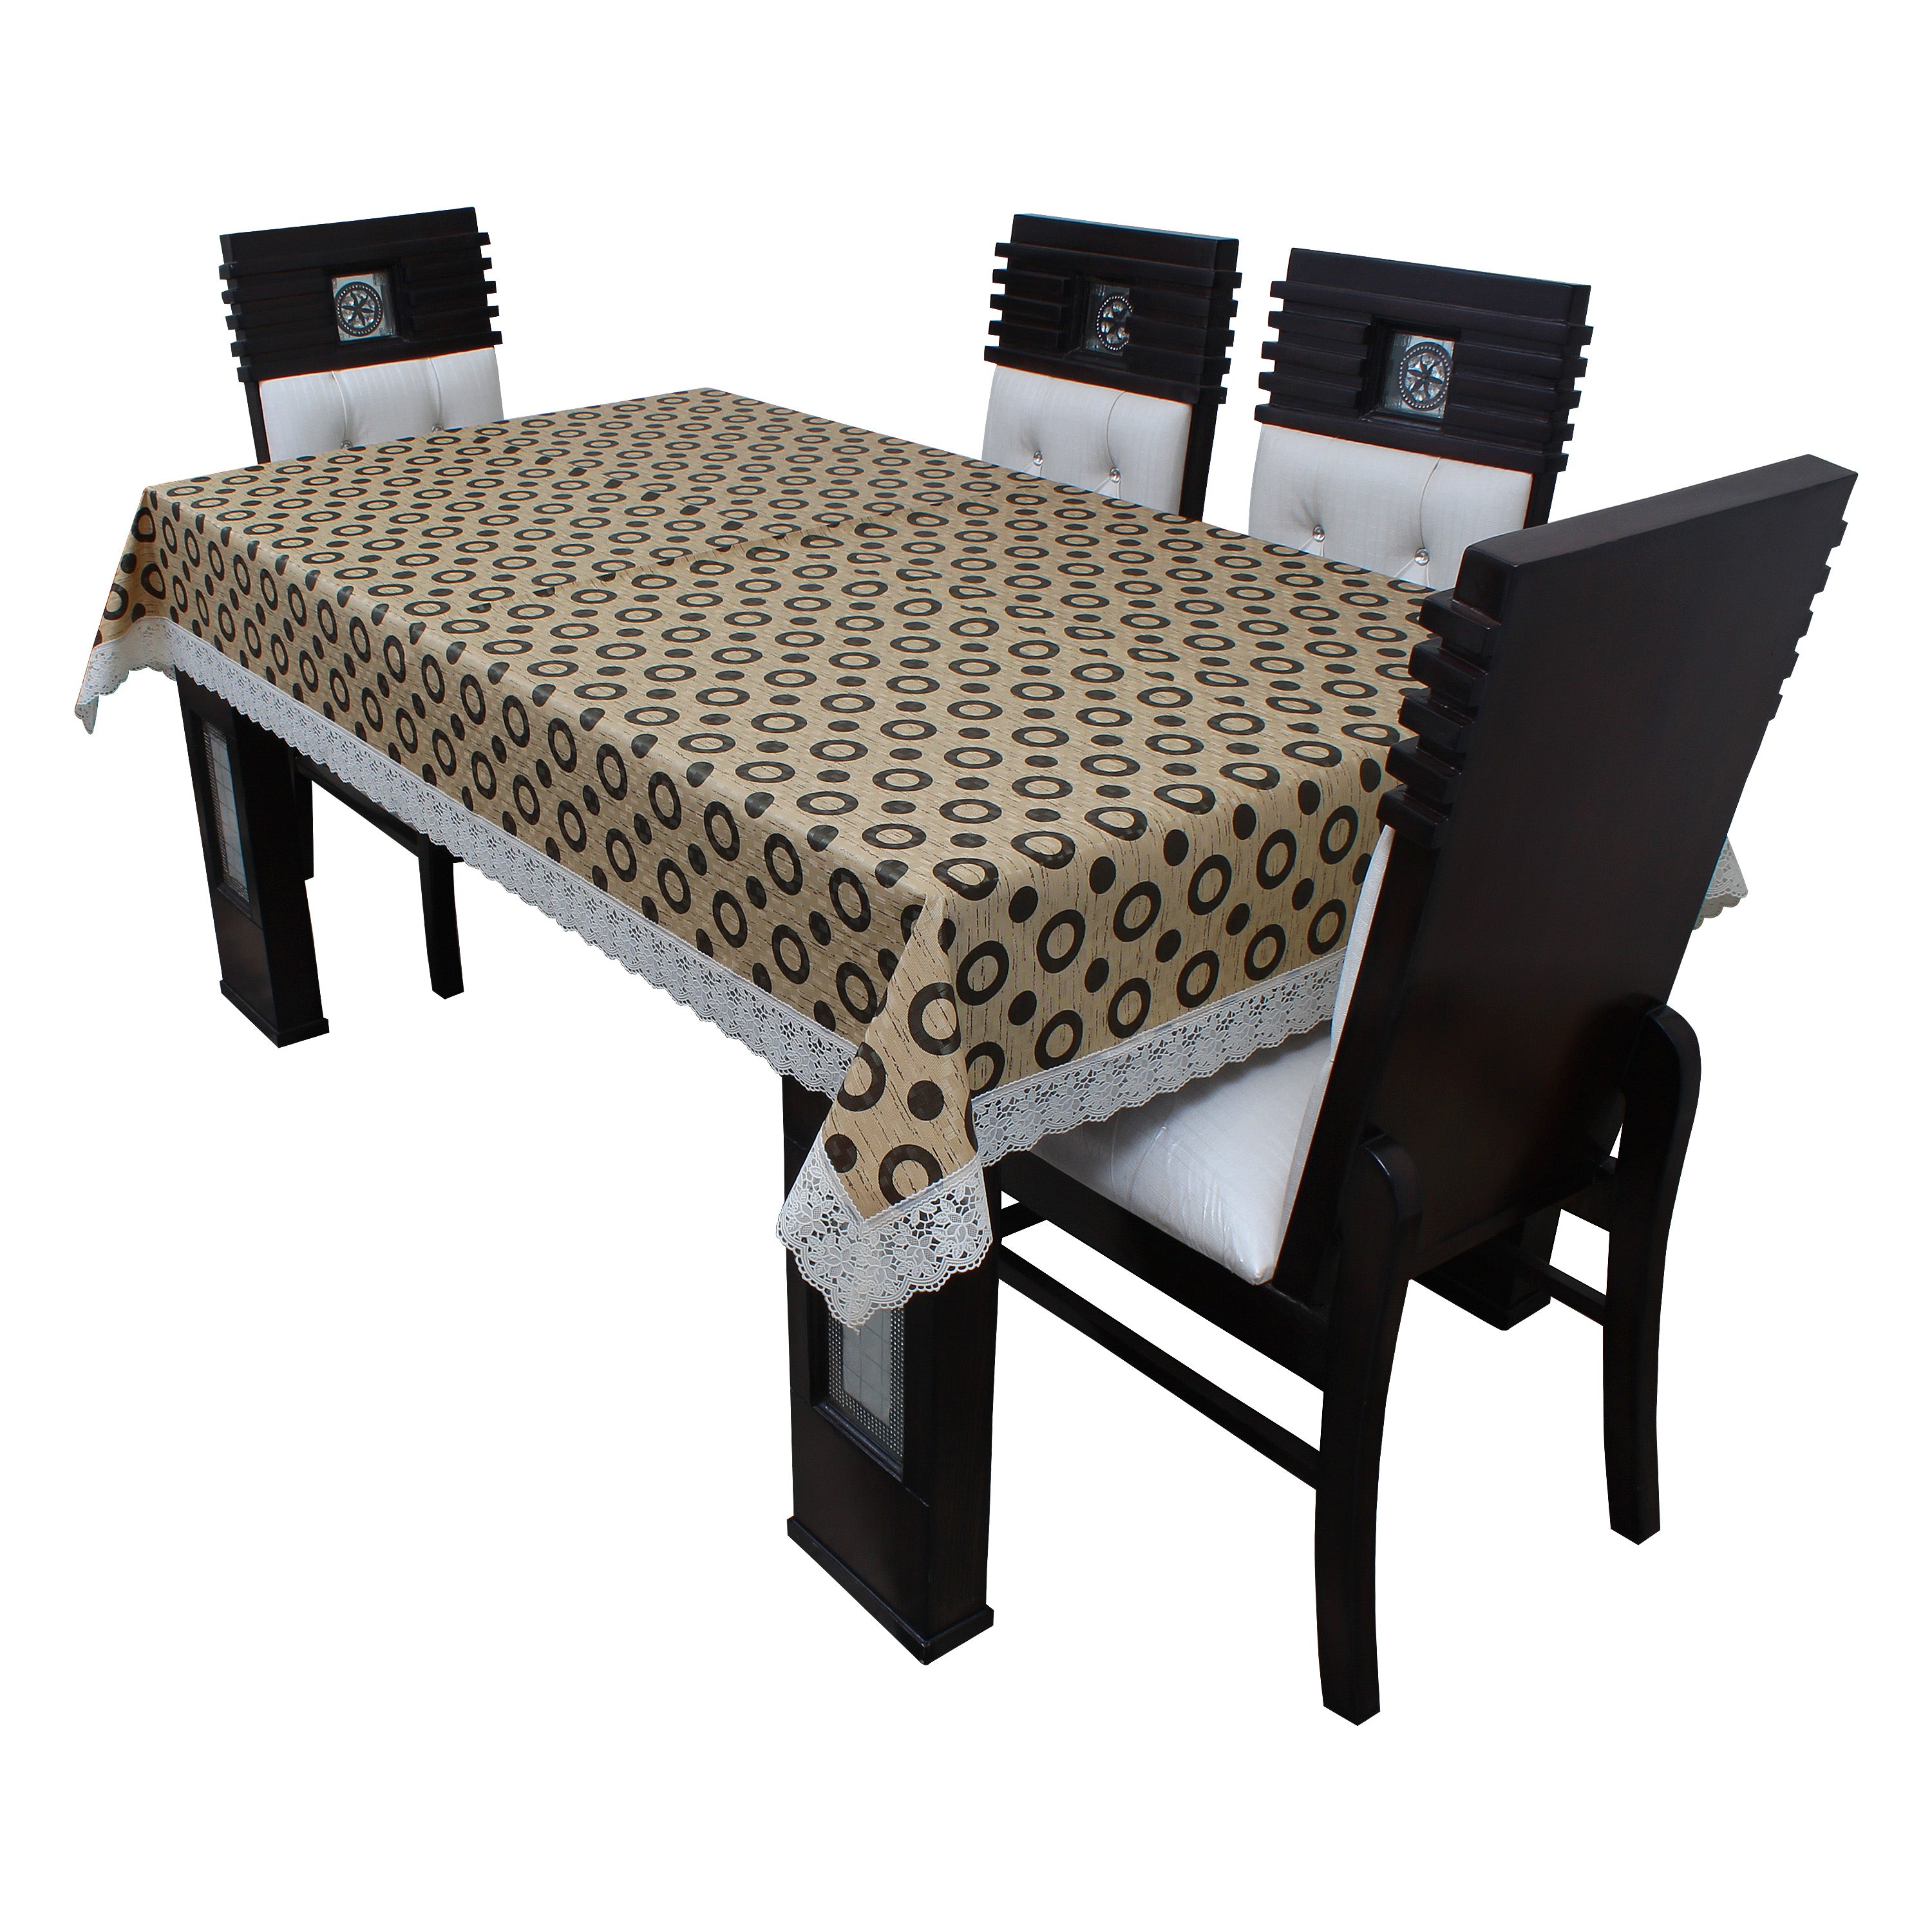 Waterproof and Dustproof Dining Table Cover, SA02 - Dream Care Furnishings Private Limited